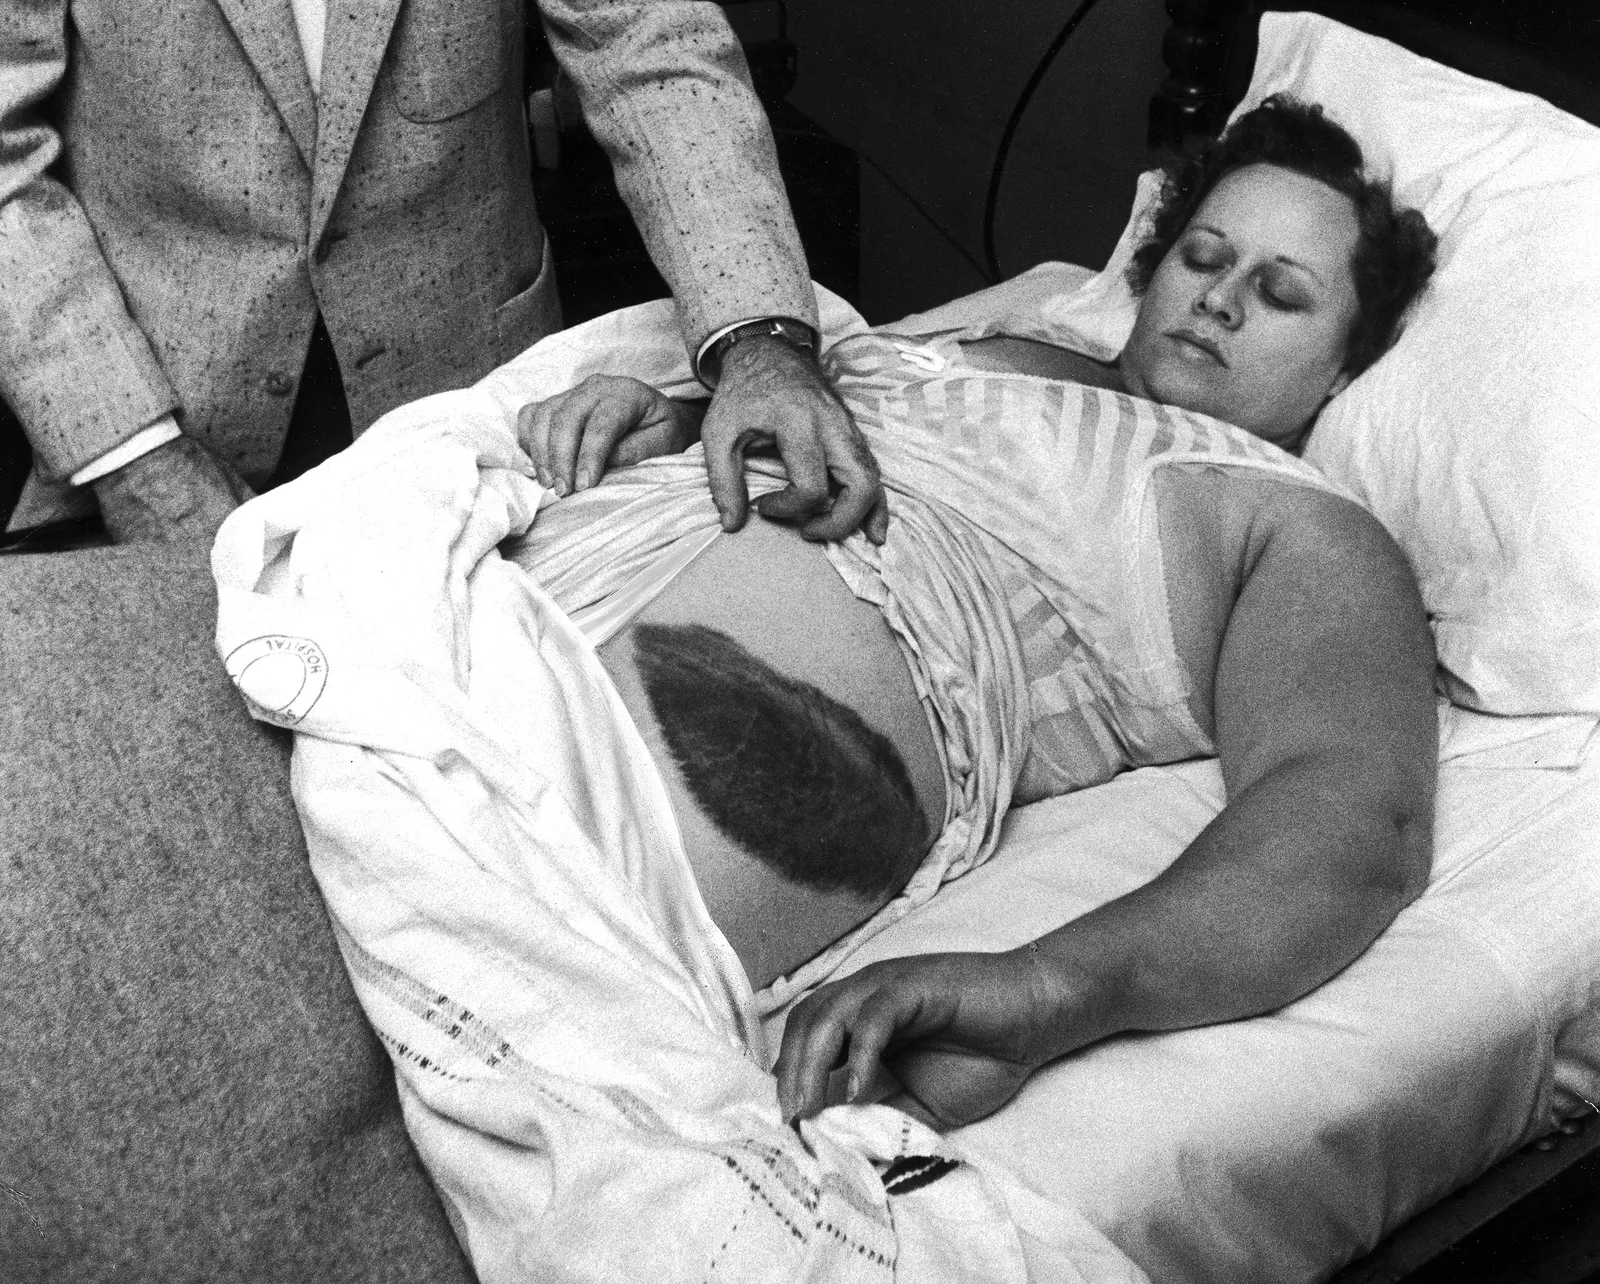 In 1954, an Extraterrestrial Bruiser Shocked This Alabama Woman ...